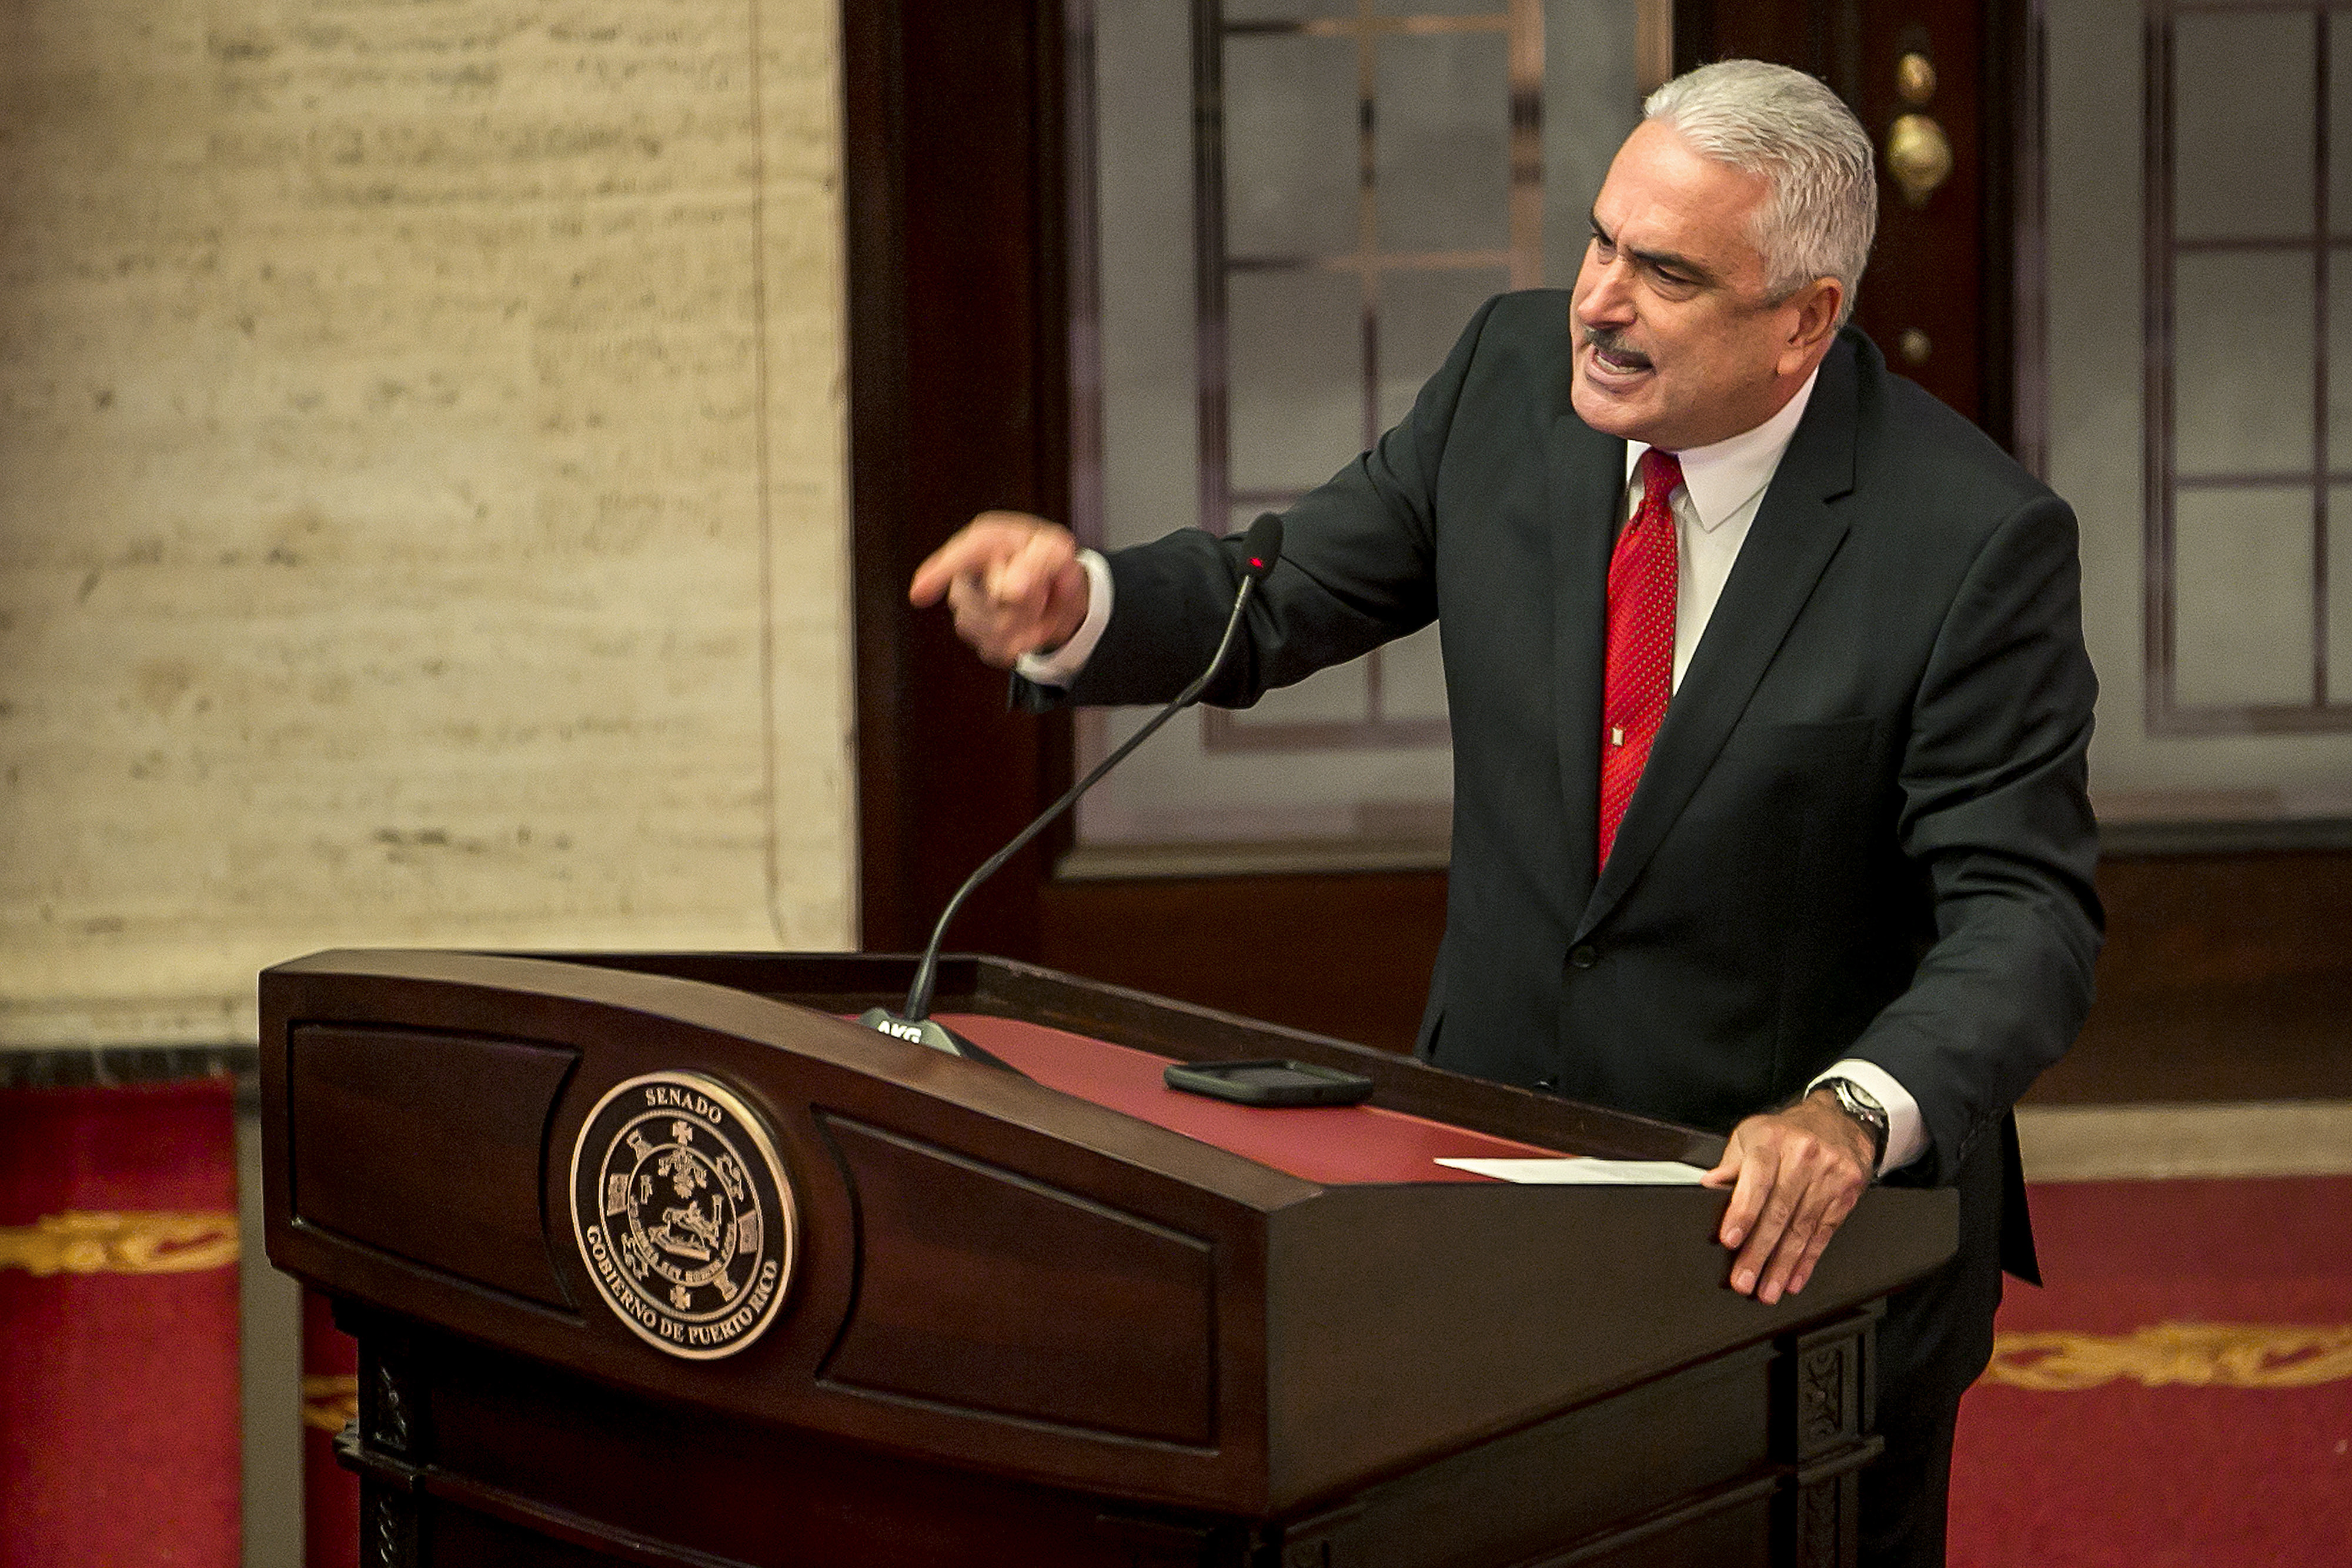 Thomas Rivera Schatz, president of the Senate of Puerto Rico, speaks during a special session of the Legislative Assembly at the Capitol building in San Juan, Puerto Rico, on Thursday, Aug. 1, 2019. Embattled Puerto Rico Governor Ricardo Rossello's nomination of his successor is heading into crucial last-minute votes amid doubts that lawmakers will confirm his pick, creating a potential leadership void for the bankrupt island. (Bloomberg—Bloomberg via Getty Images)